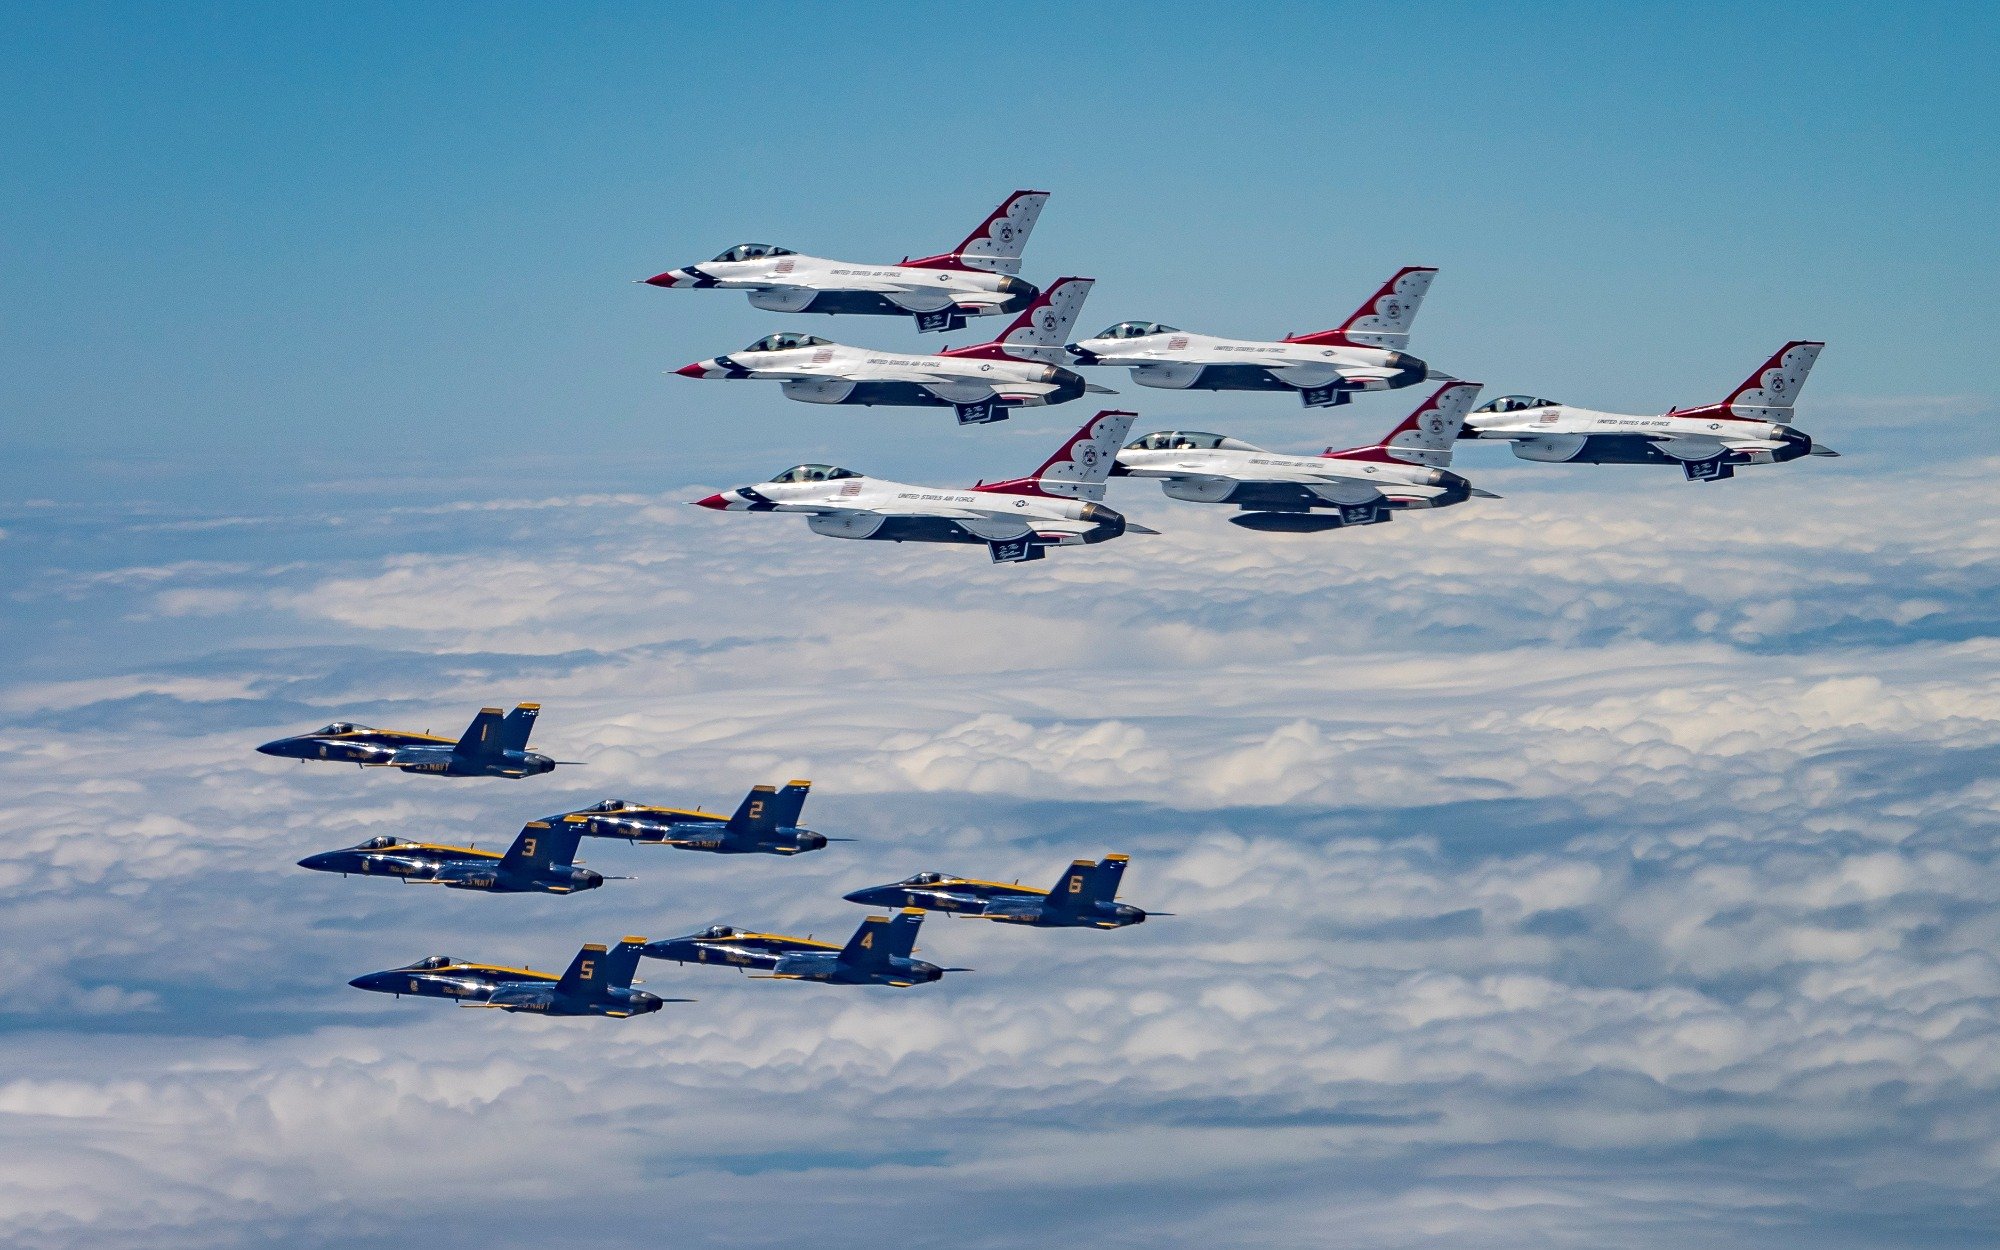 Blue Angels Documentary to Hit IMAX Theaters